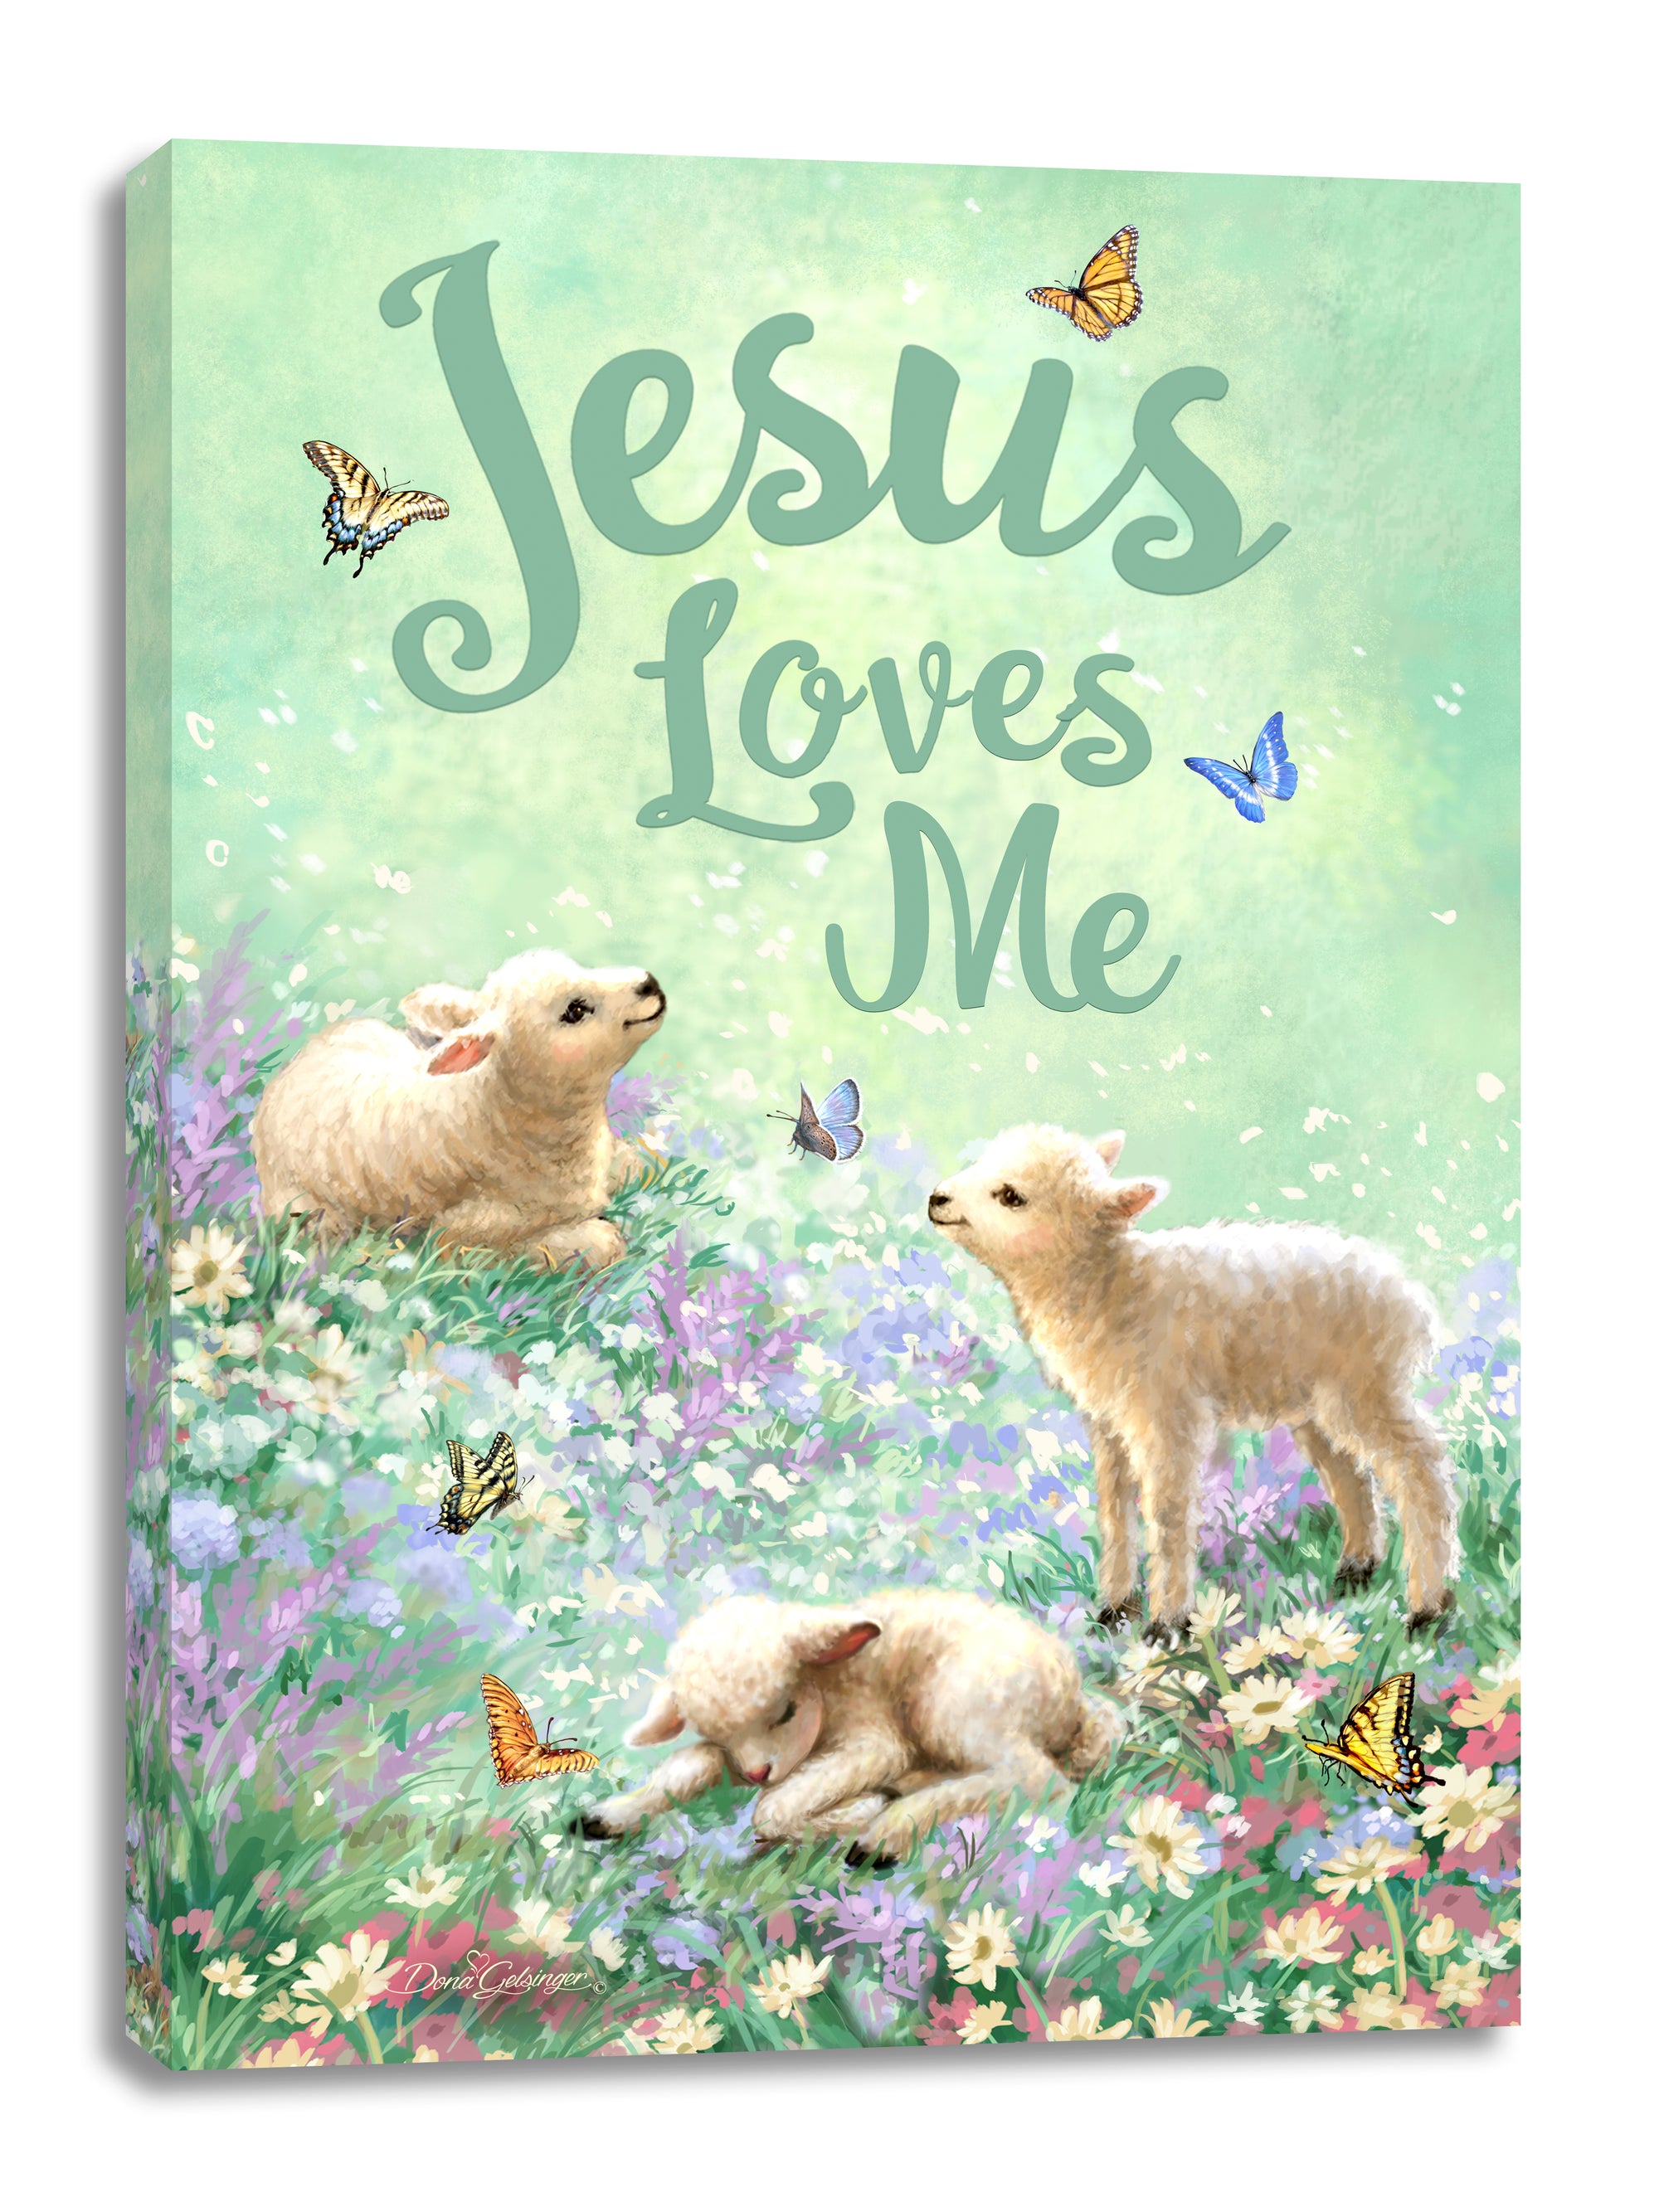  Featuring three adorable lambs frolicking in a flower-covered field, surrounded by a flurry of vibrant butterflies, this piece is a true delight for the eyes.  The message "Jesus loves me" is gracefully written on the canvas, serving as a gentle reminder of the boundless love and compassion that our Savior has for us.